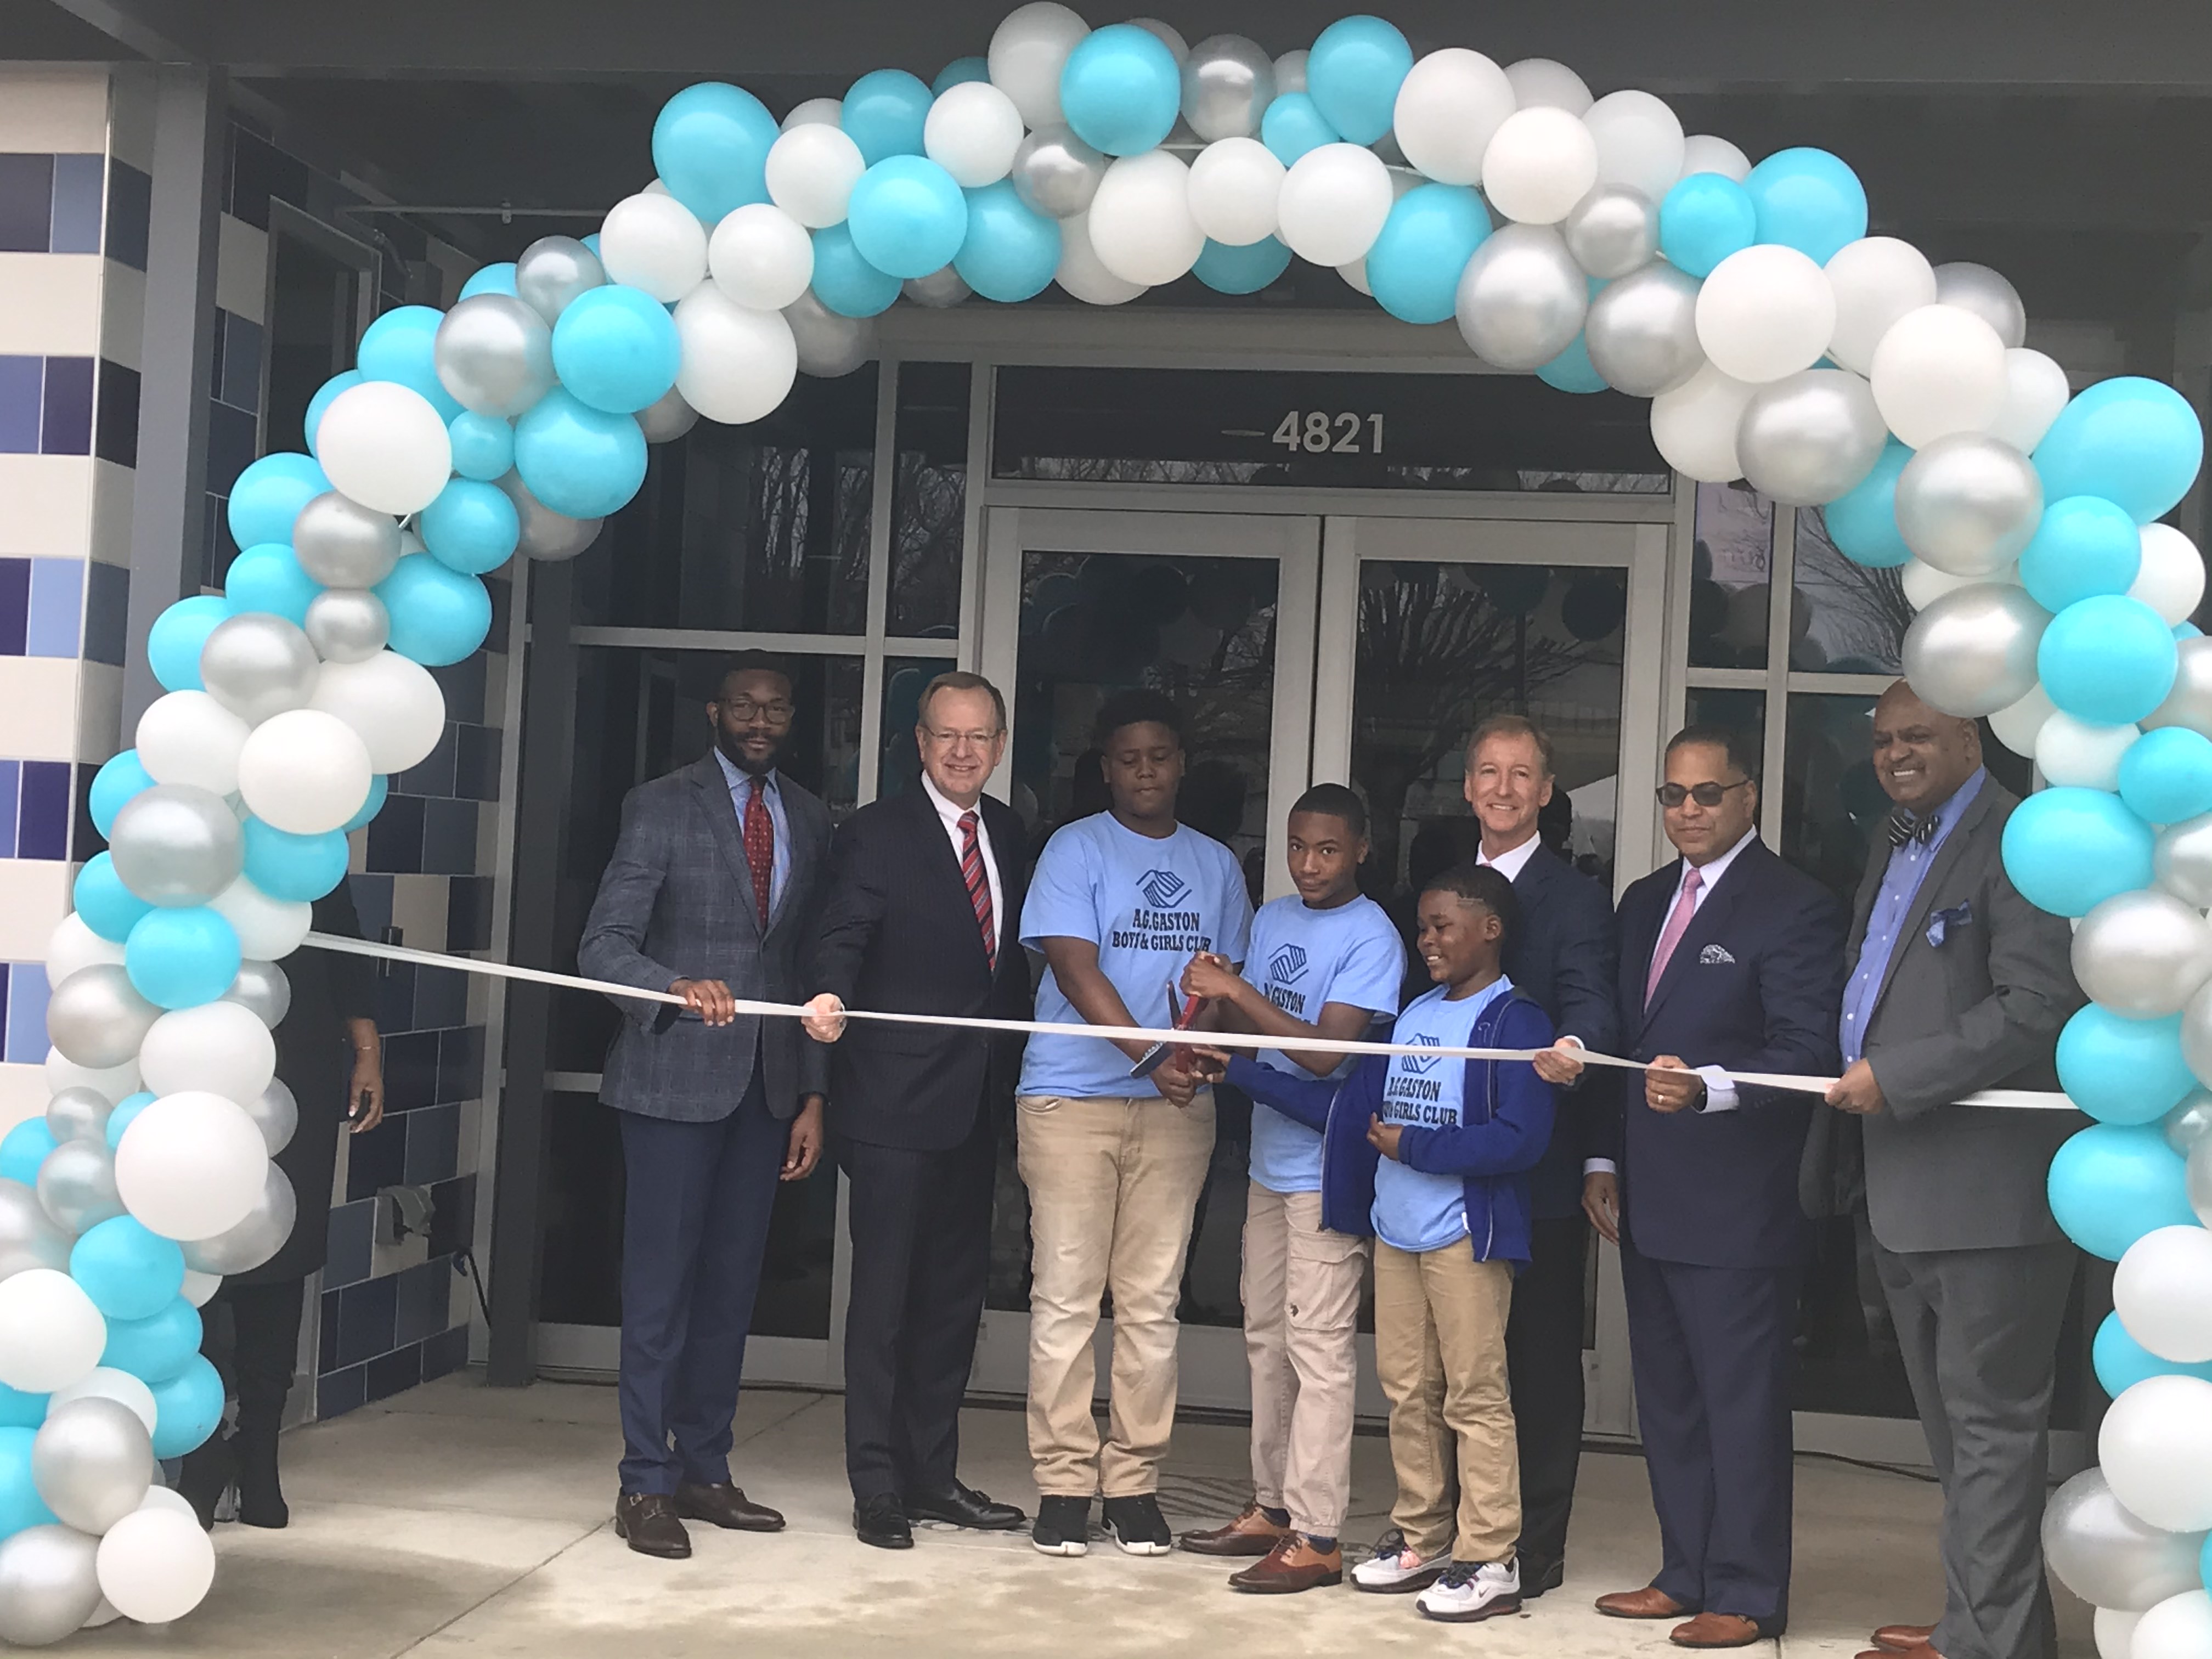 A.G. Gaston Boys and Girls Club opens new clubhouse on CrossPlex campus